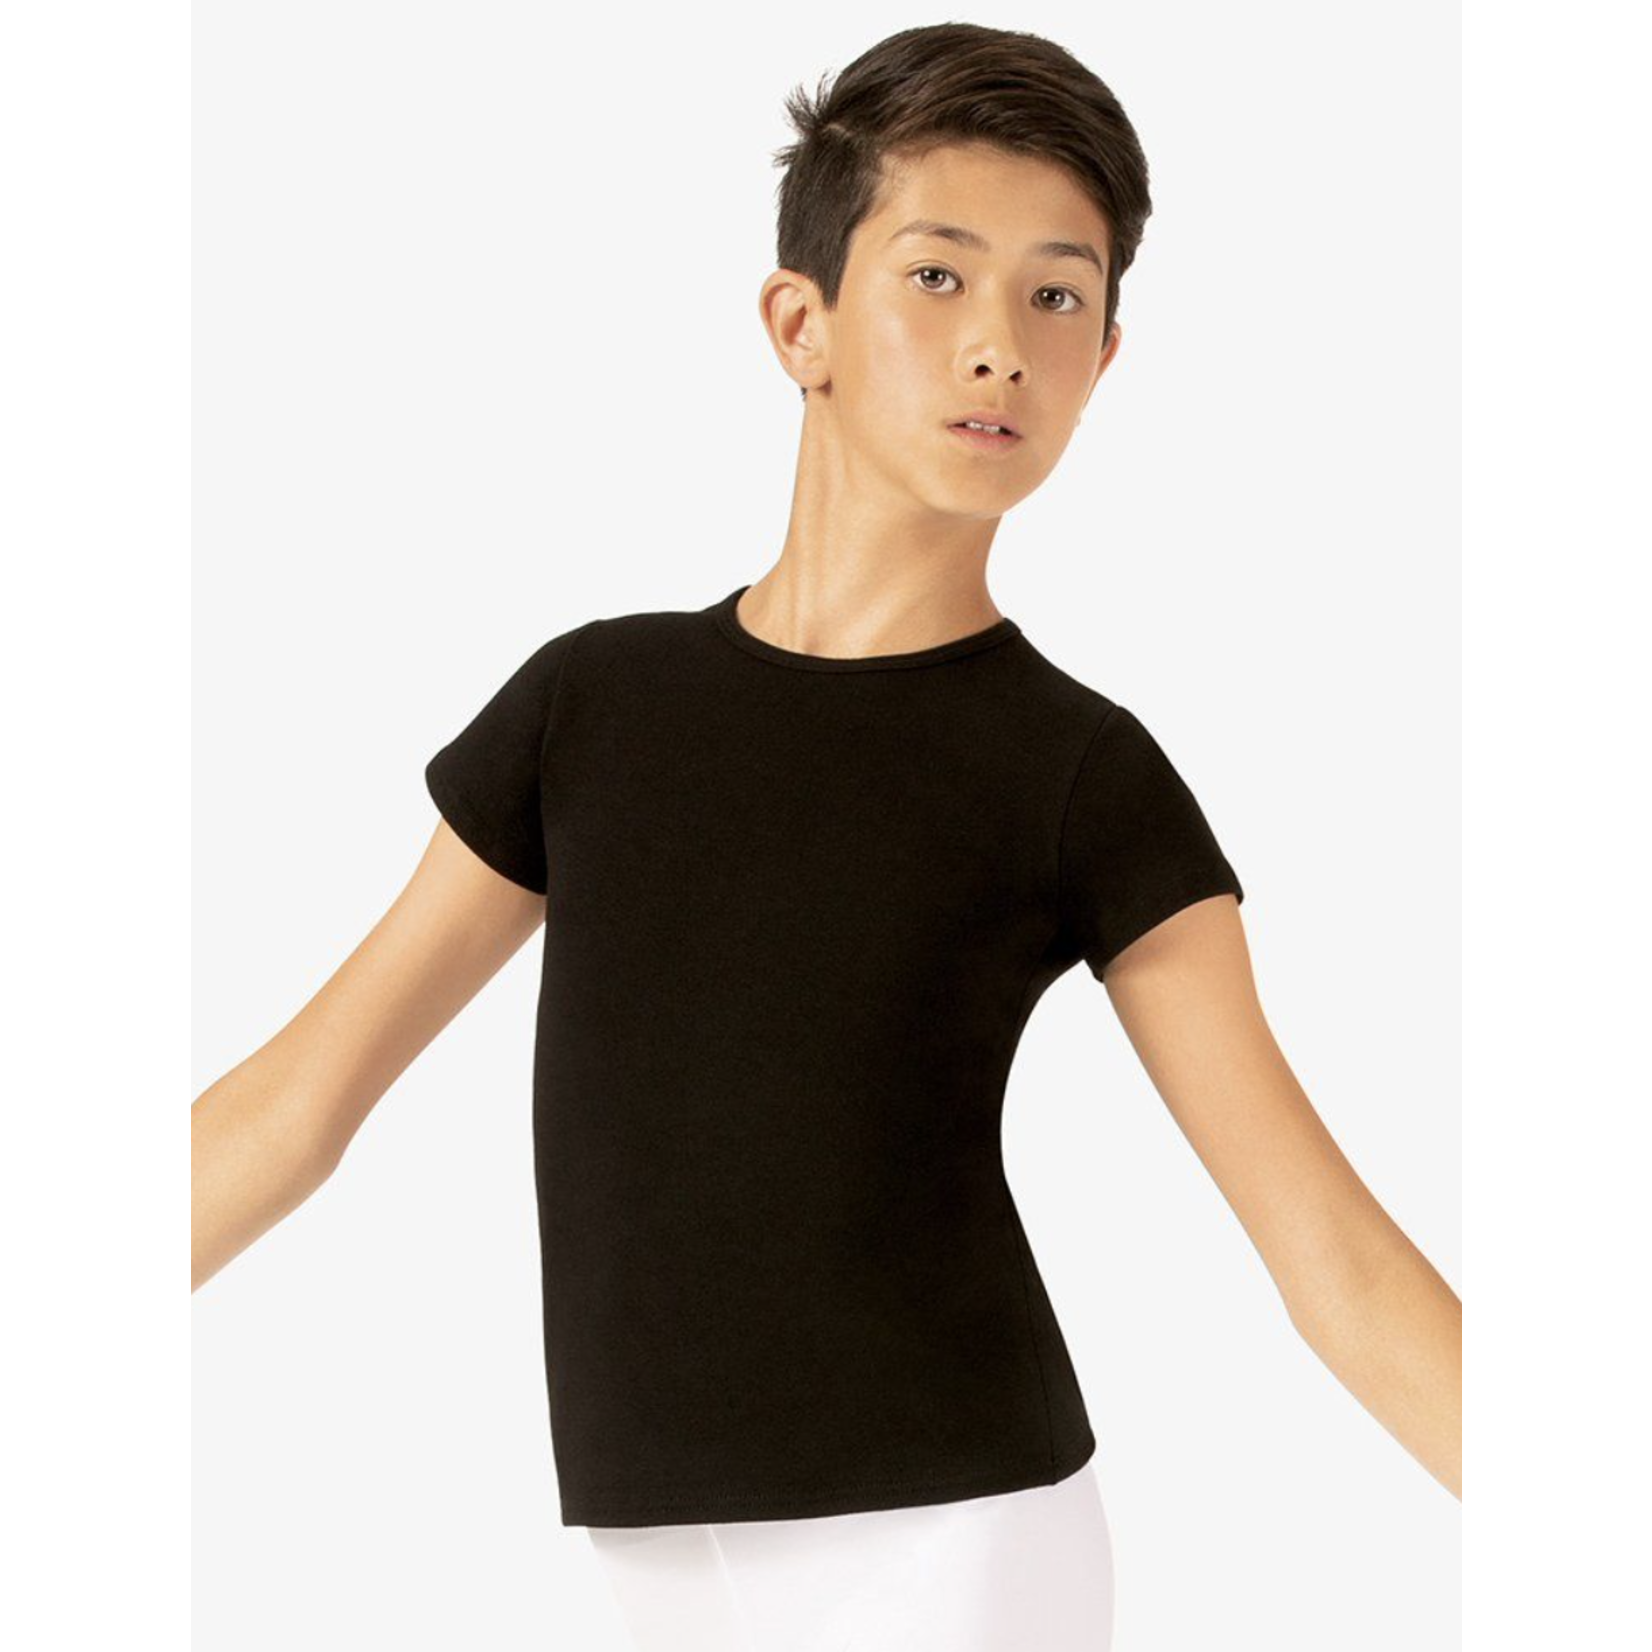 Body Wrappers/Angelo Luzio B190- Boys Cotton/Lycra Fitted Tee